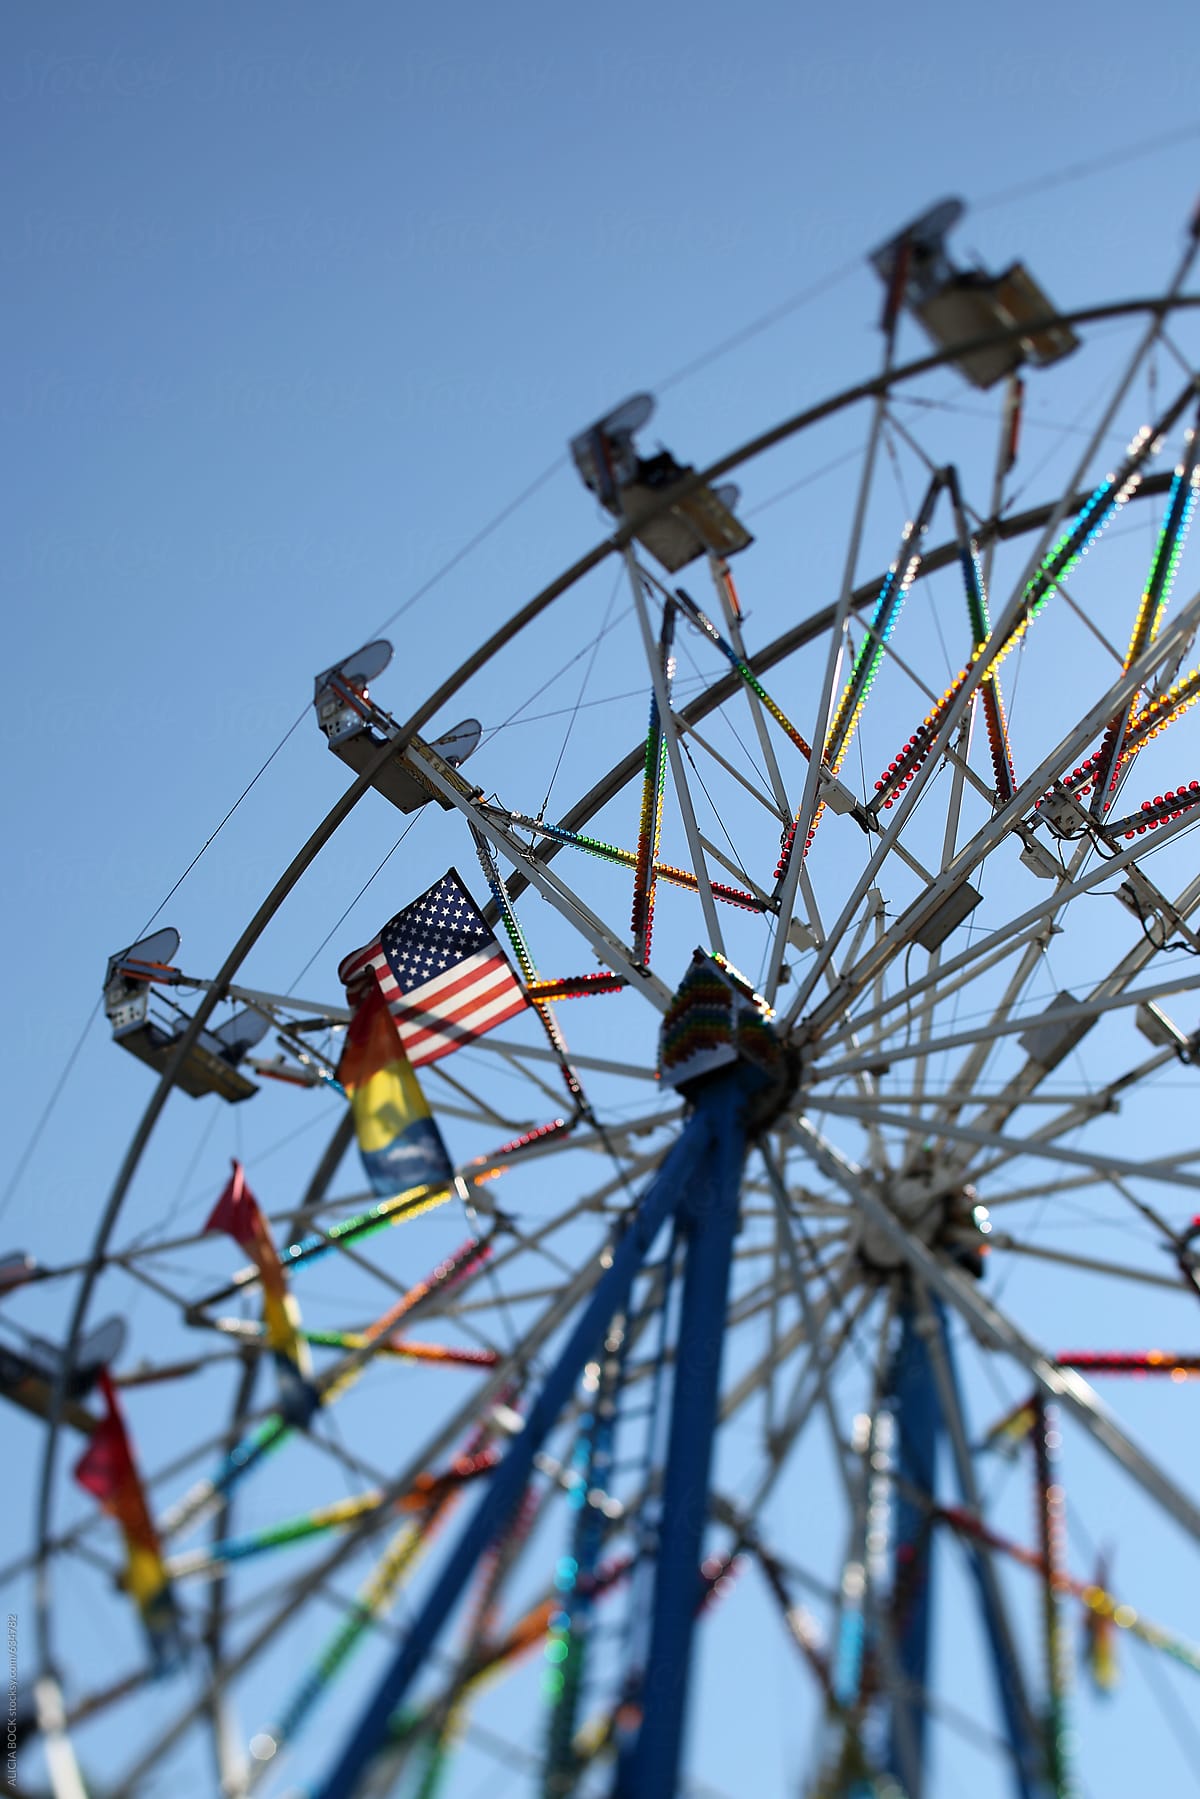 A Ferris Wheel Decorated With Flags On A Summer Day